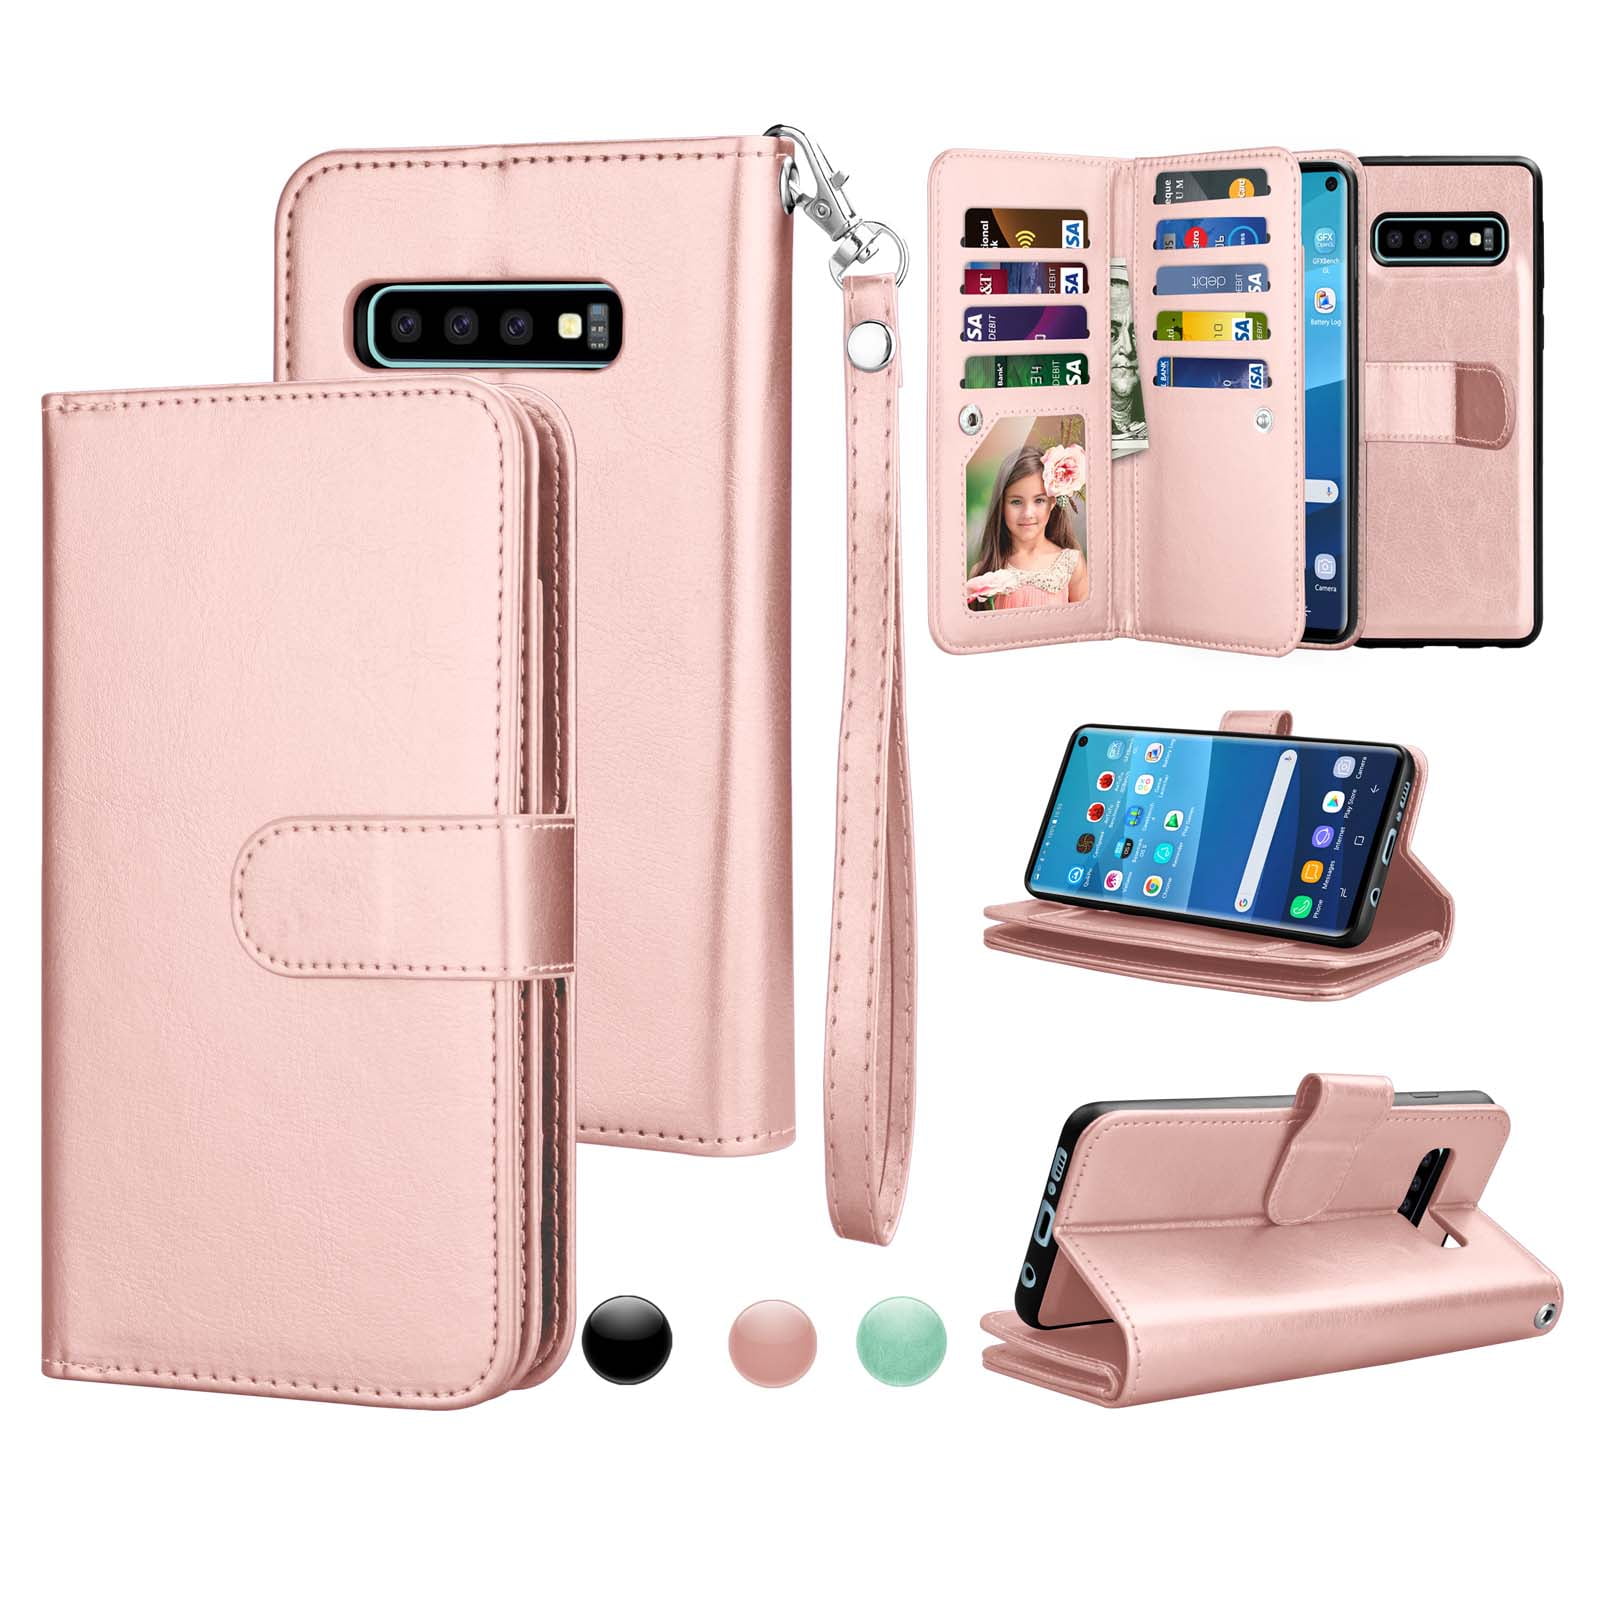 Samsung Galaxy S10 Plus Flip Case Cover for Leather Card Holders Wallet Cover Kickstand Premium Business Flip Cover